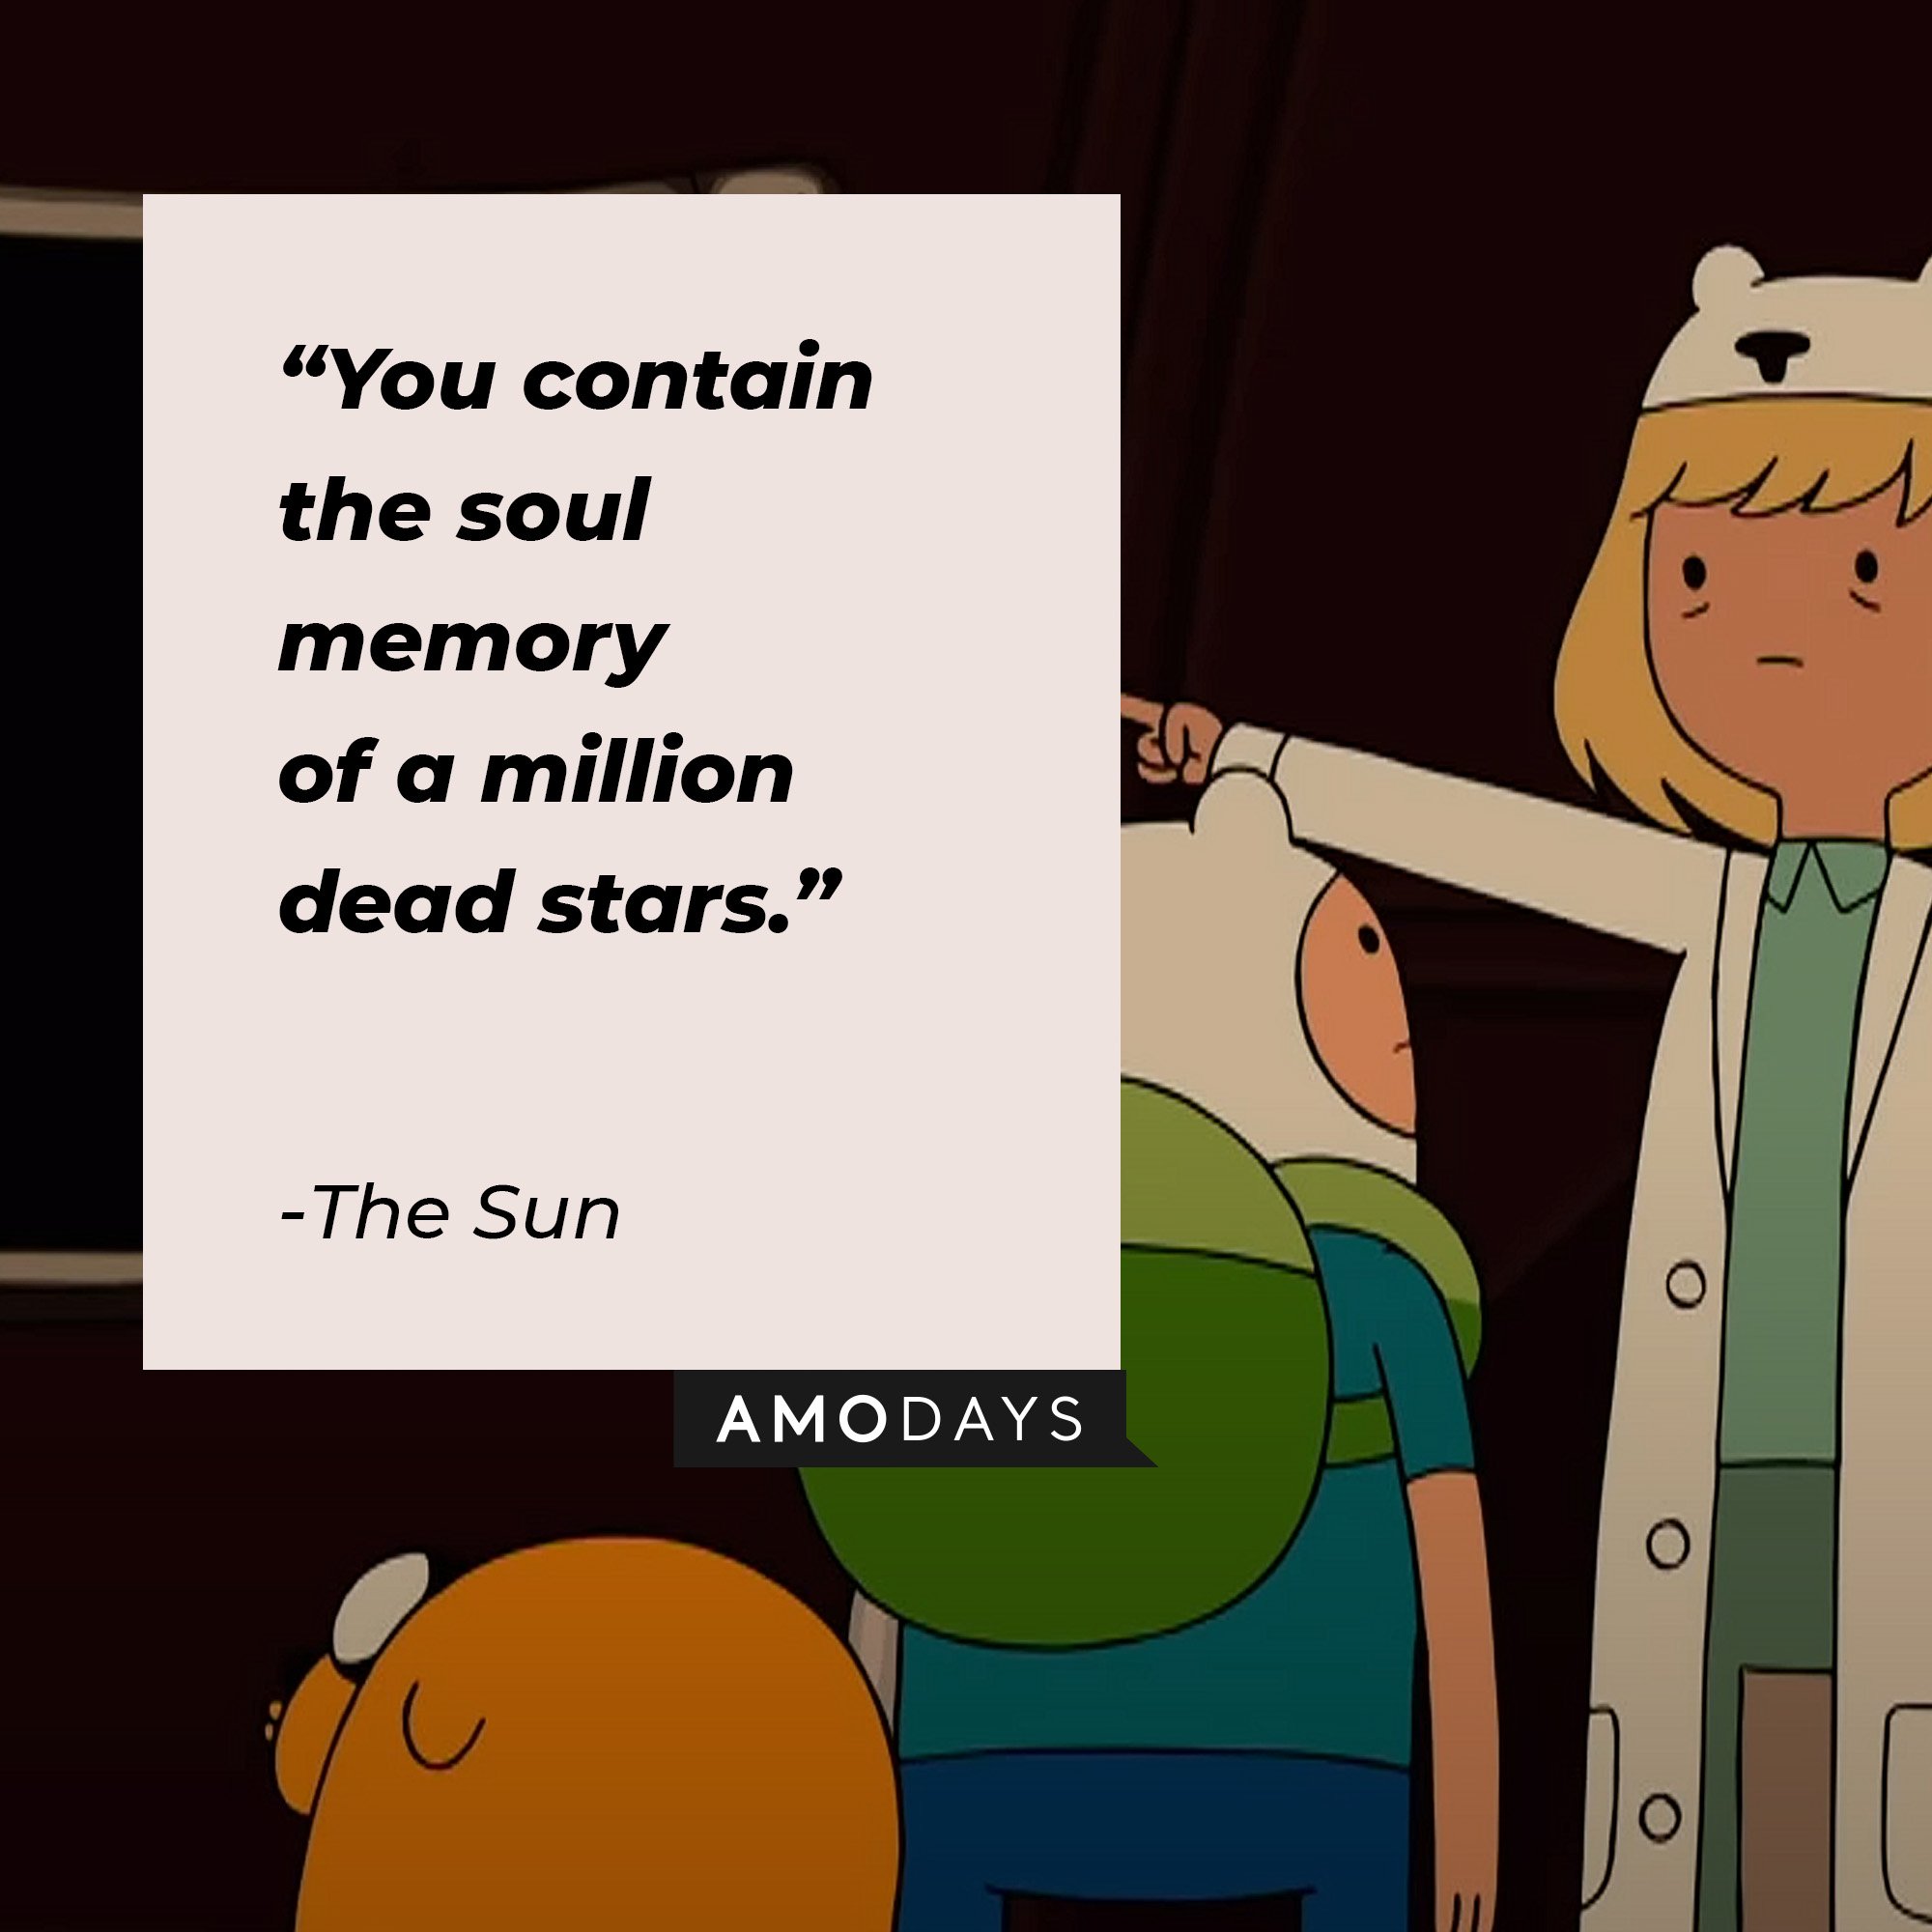 The Sun’s quote: “You contain the soul memory of a million dead stars.” | Image: AmoDays